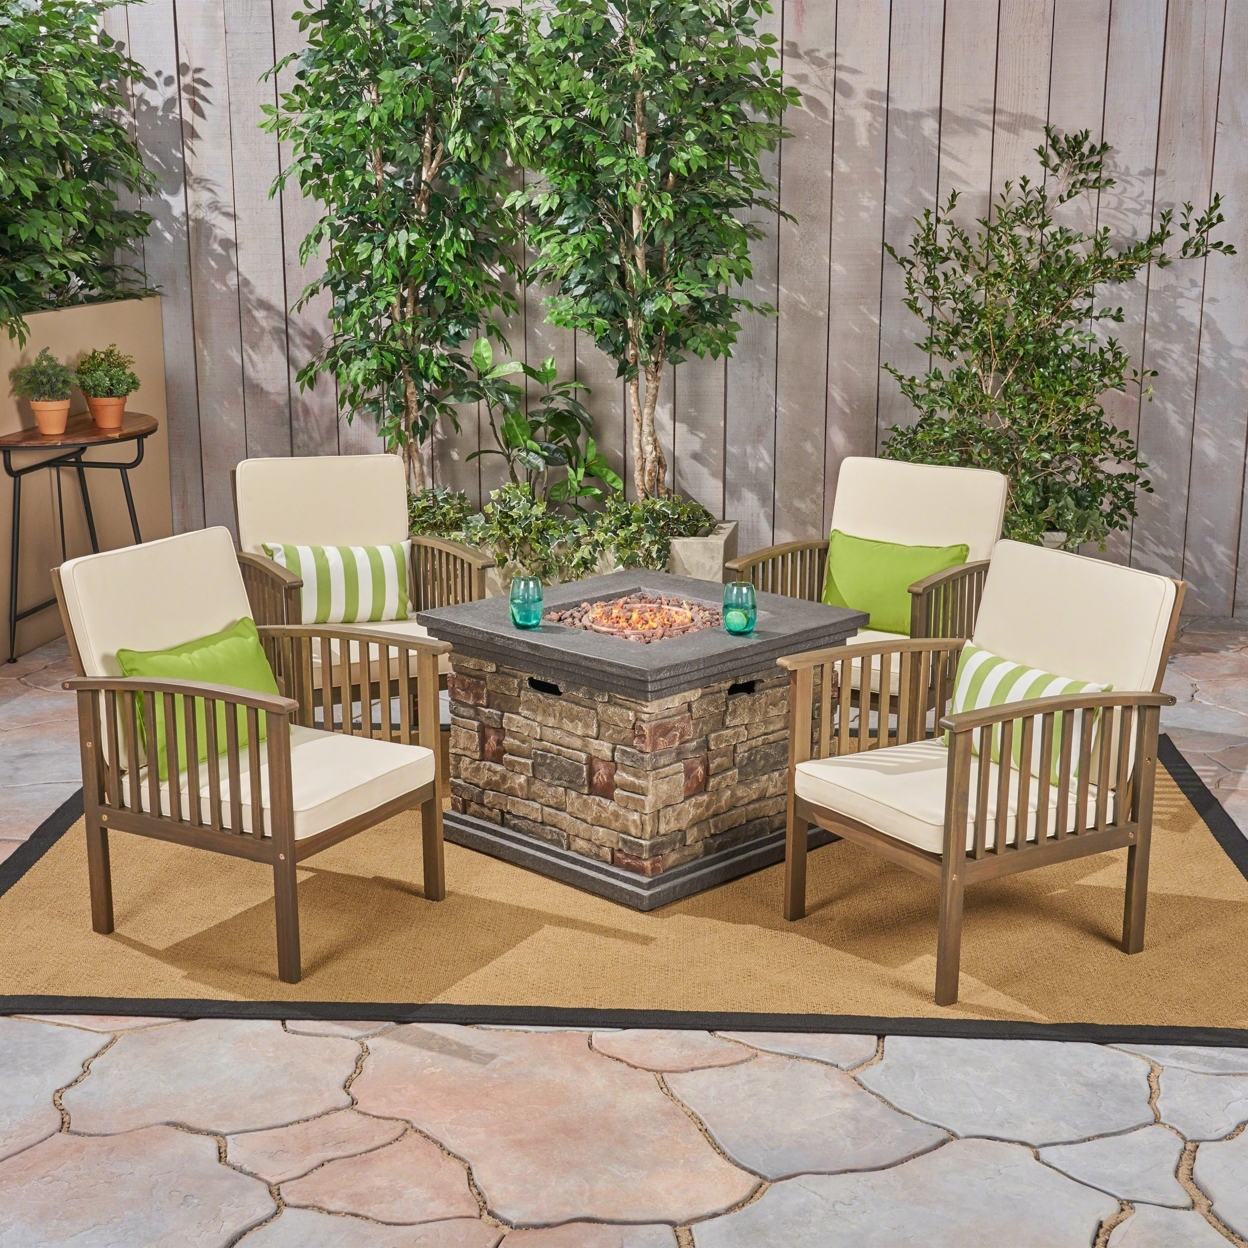 Carol Outdoor 4-Seater Acacia Wood Club Chairs With Firepit, Brown Patina Finish And Cream And Stone - Cream, Brown Patina